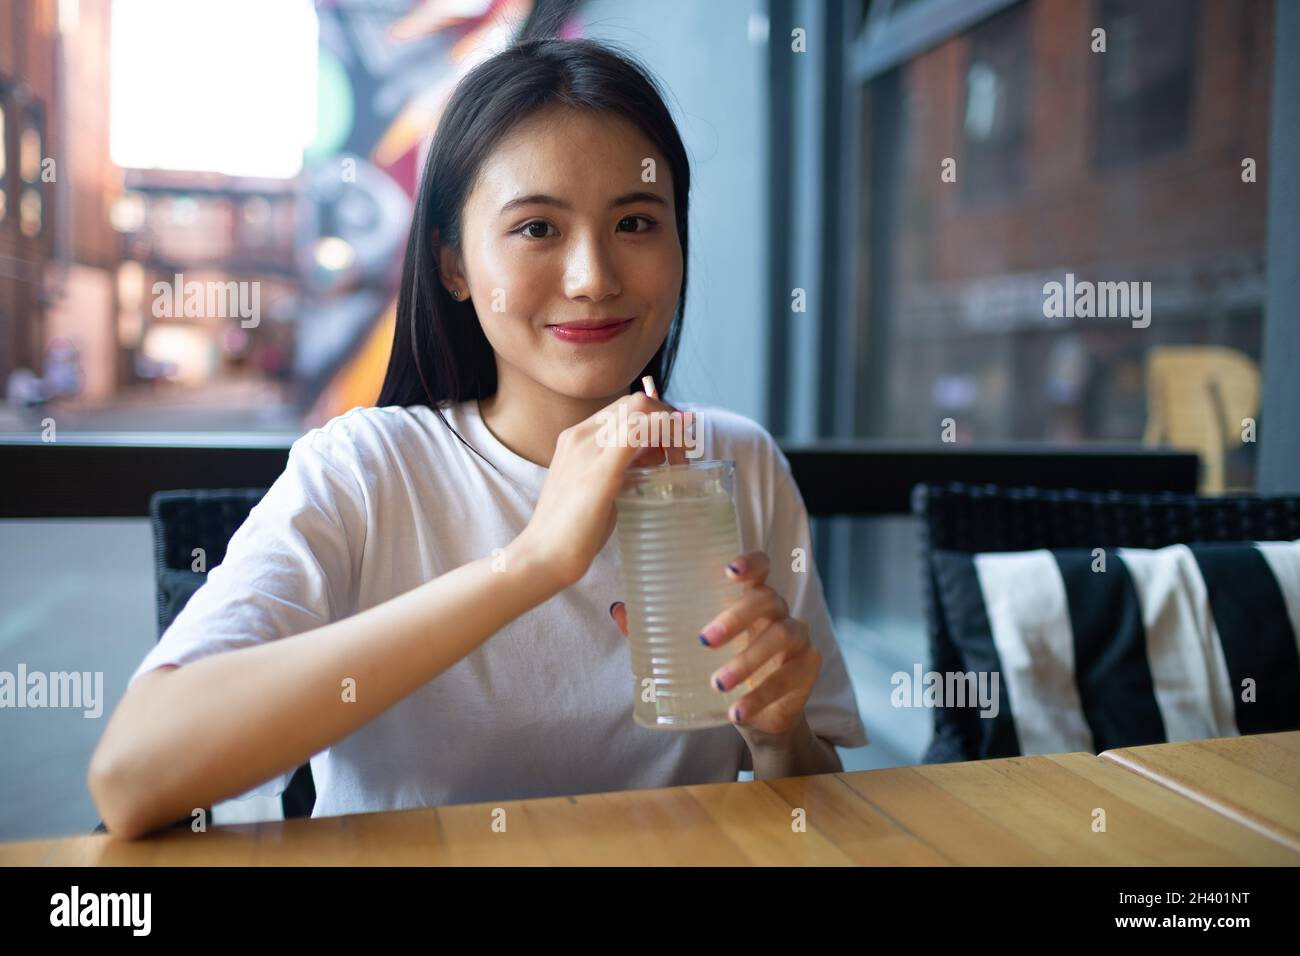 Asian young woman drink lemonade soda at the outdoors cafe Stock Photo